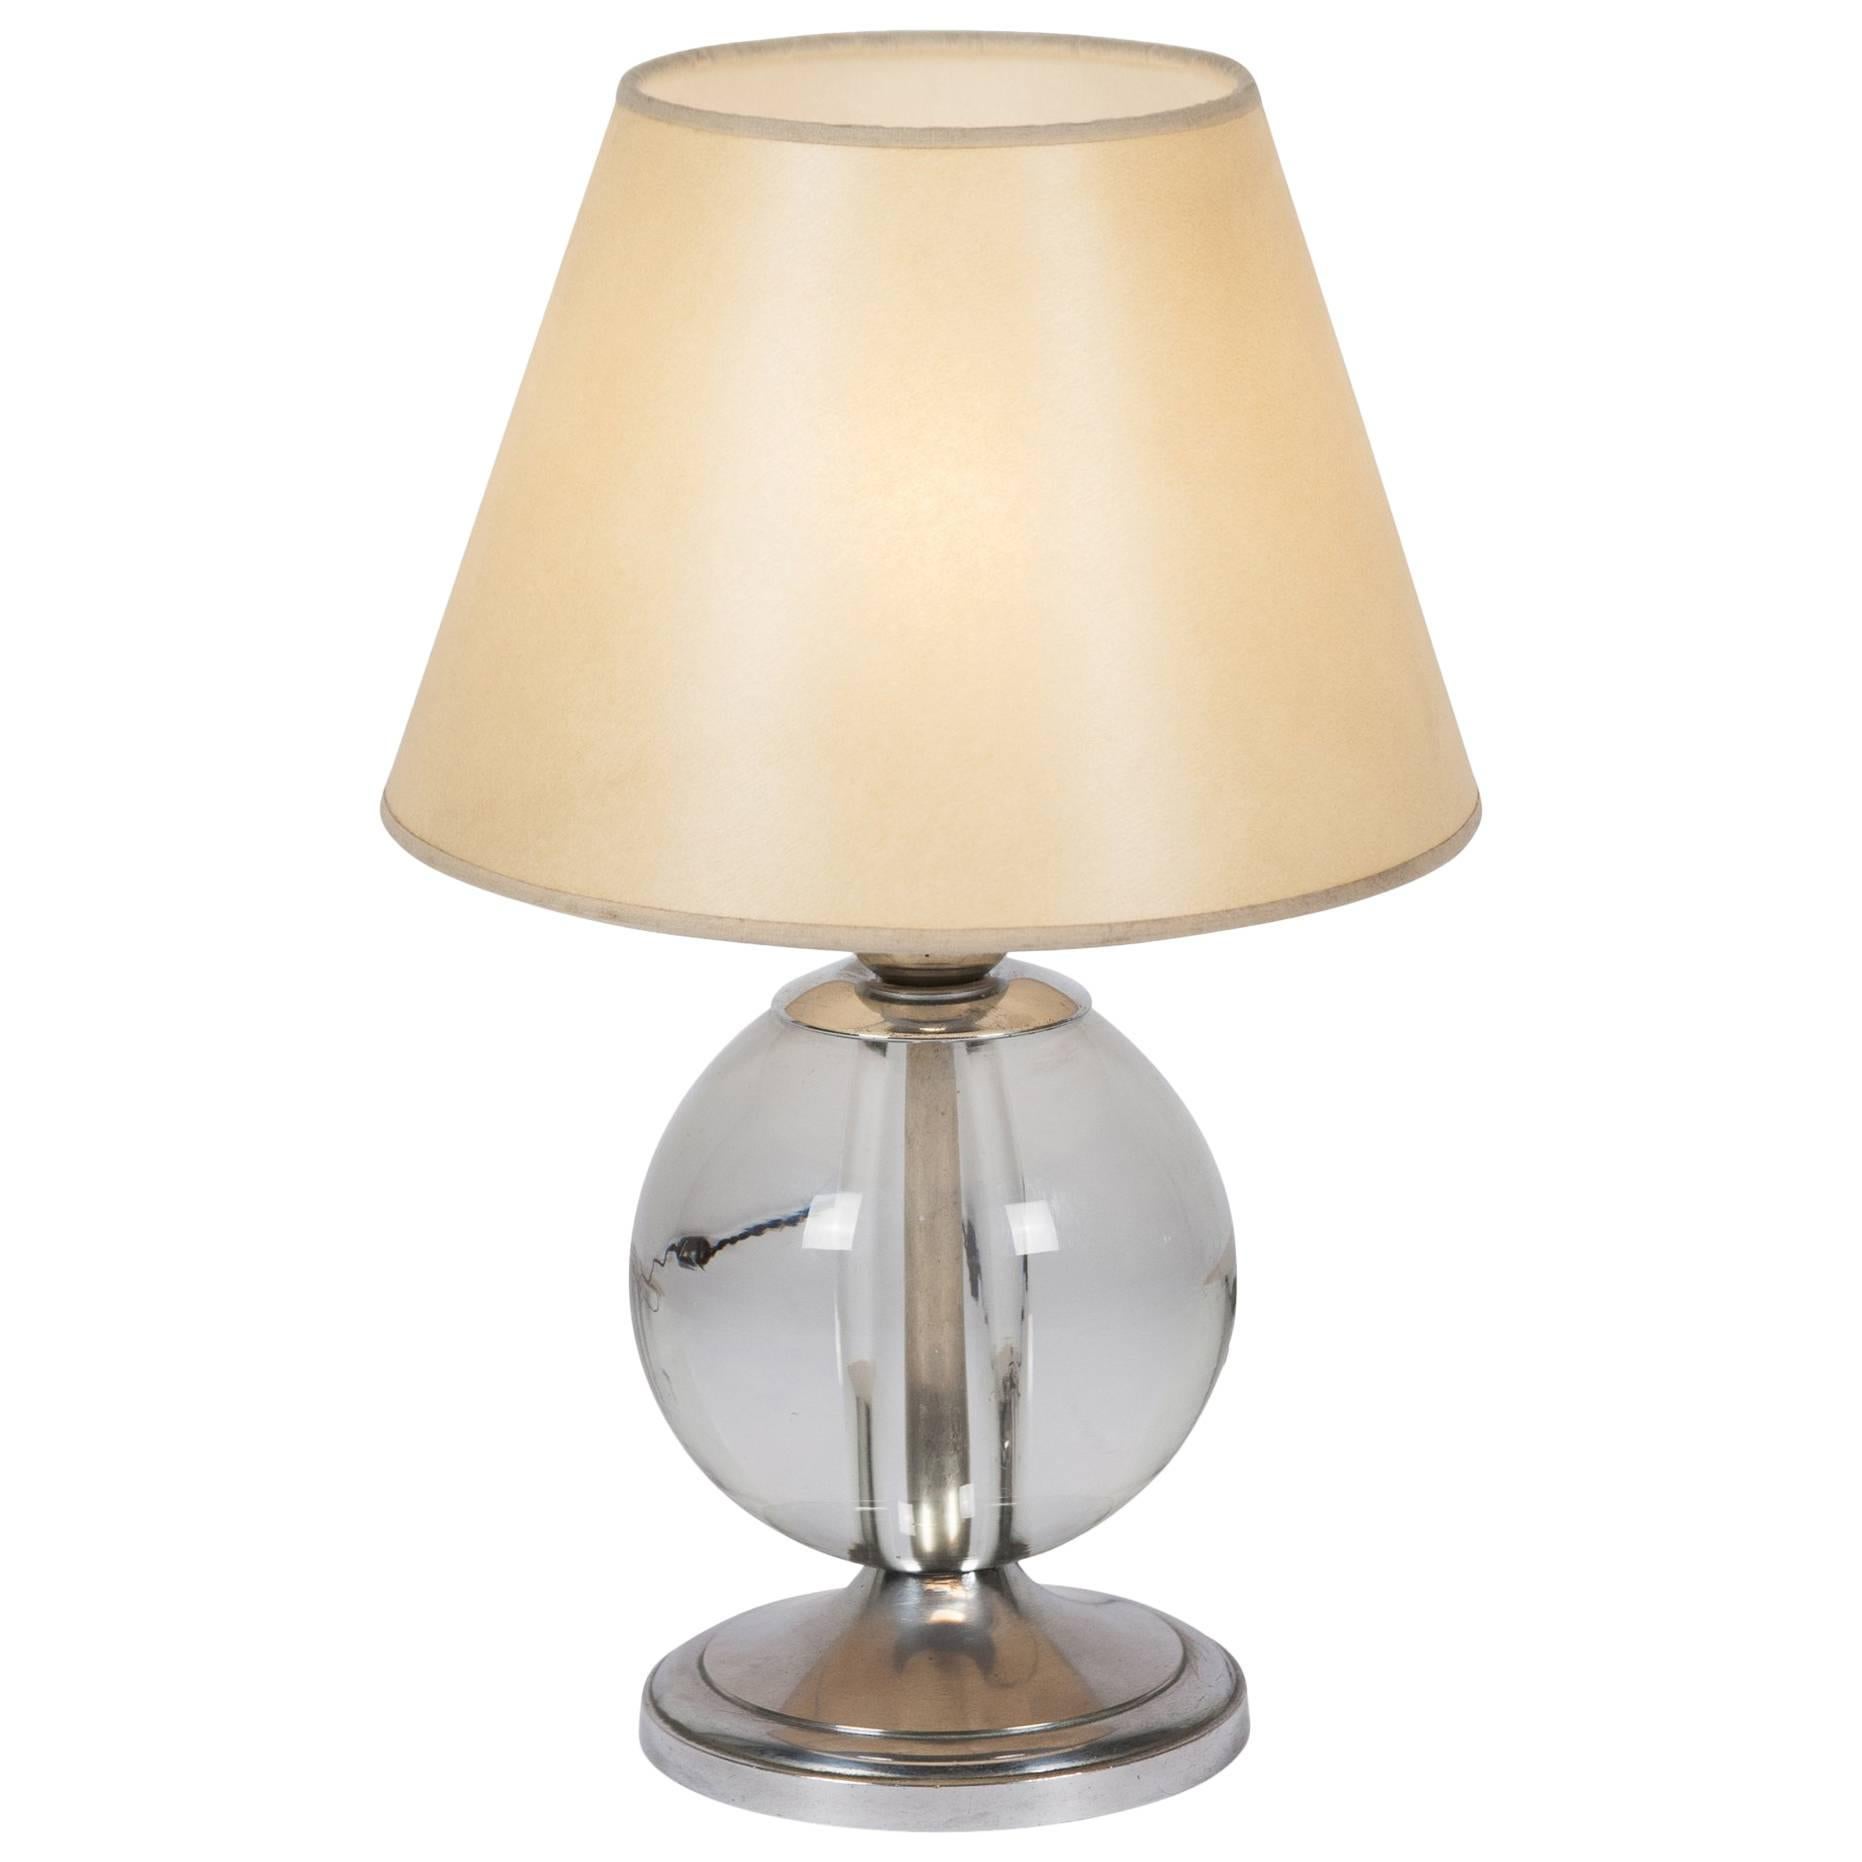 Jacques Adnet Attributed Crystal Lamp, French, 1930s For Sale